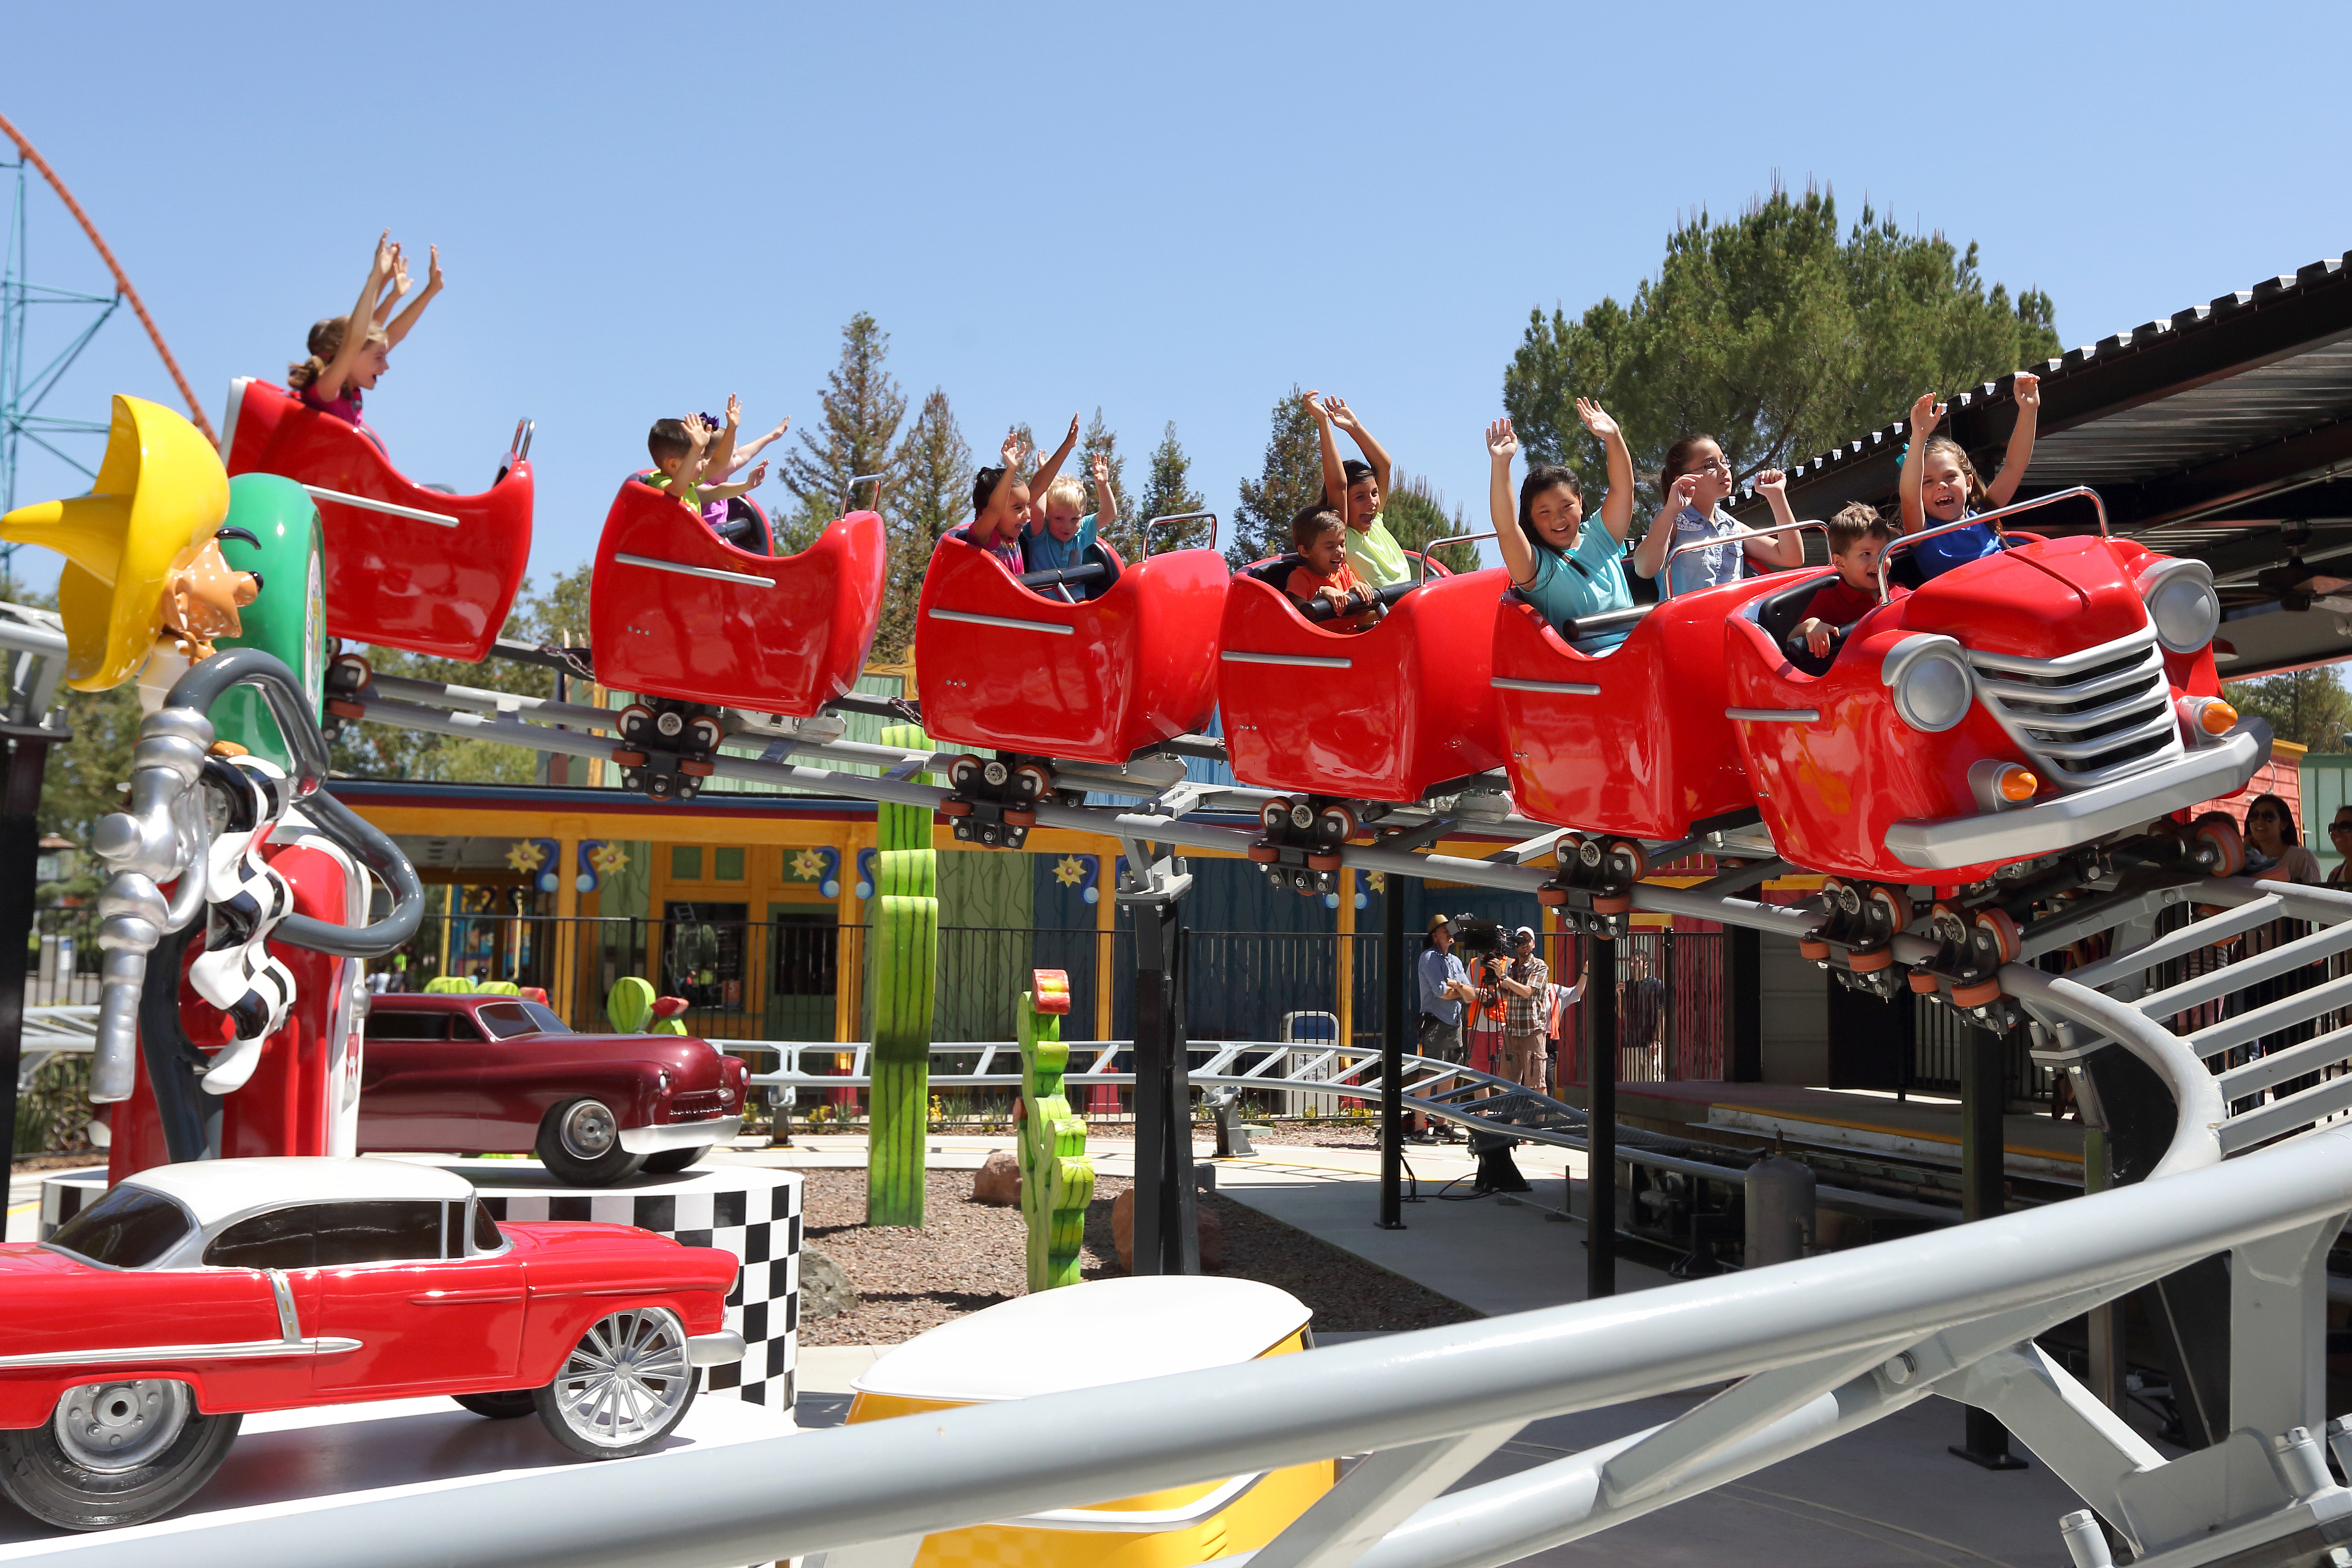 The new kids roller coaster, Speedy Gonzales Hot Rod Racers, at Six Flags Magic Mountain in Valencia, Calif.